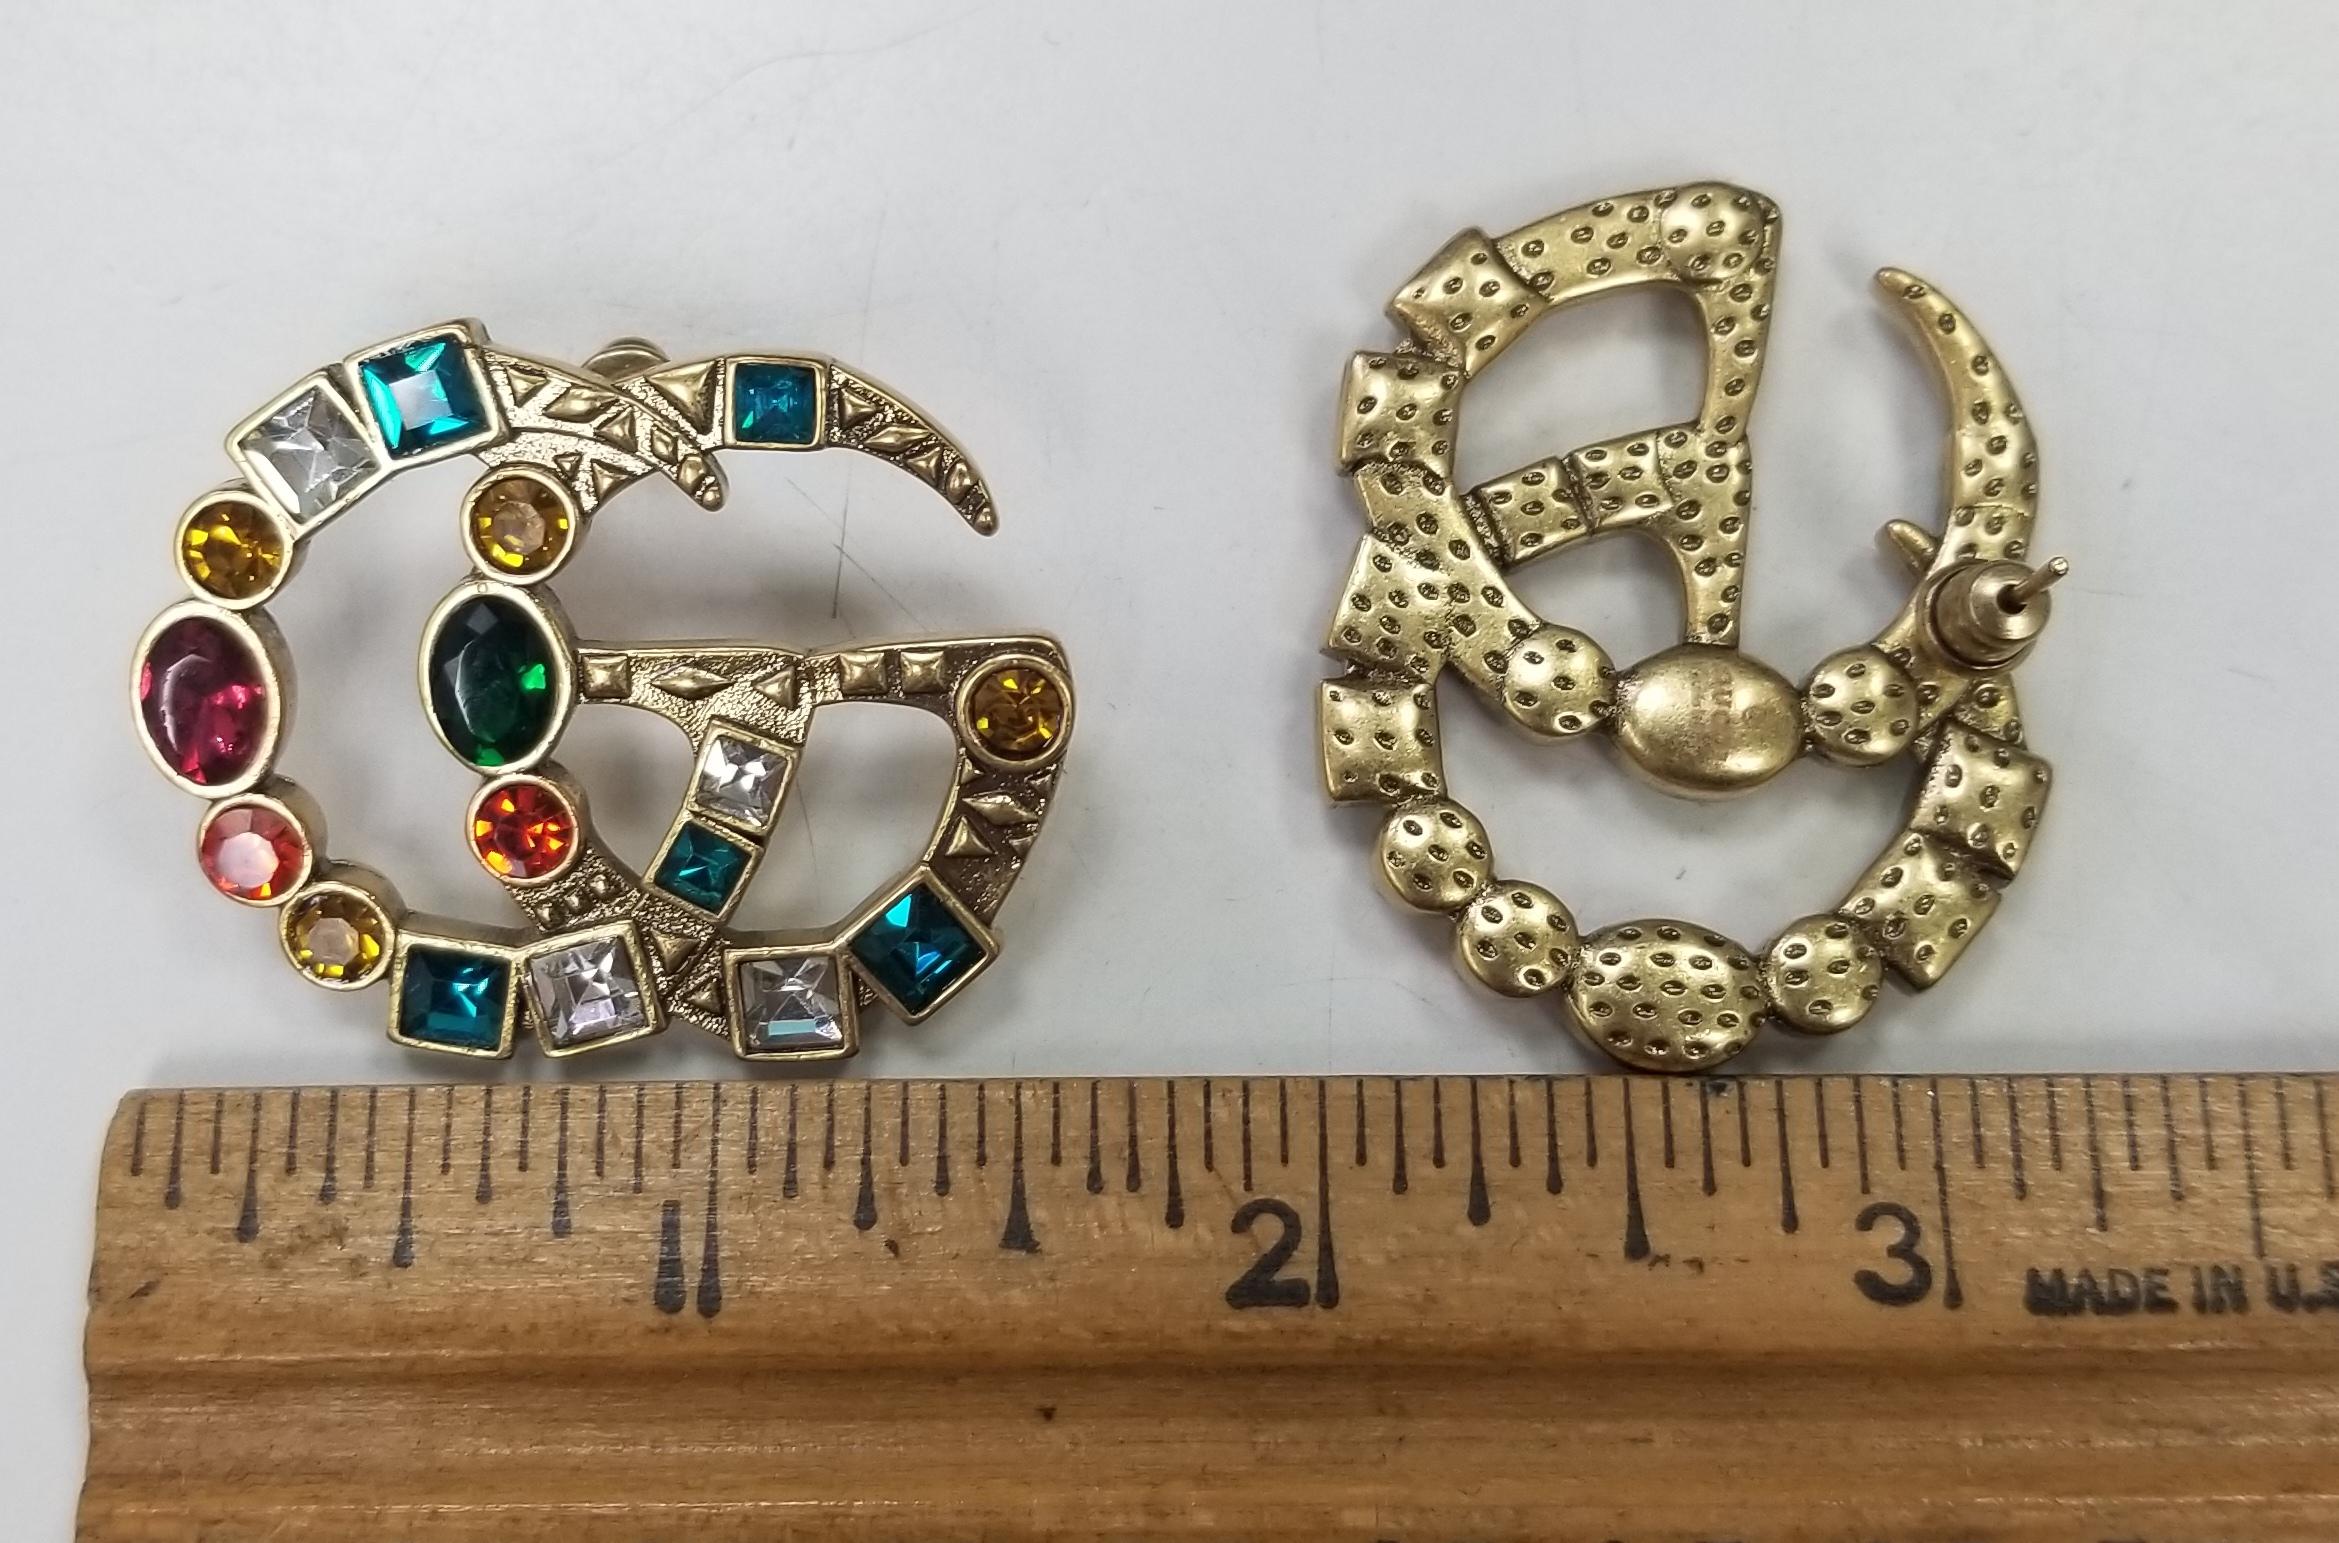 gucci necklace and earring set